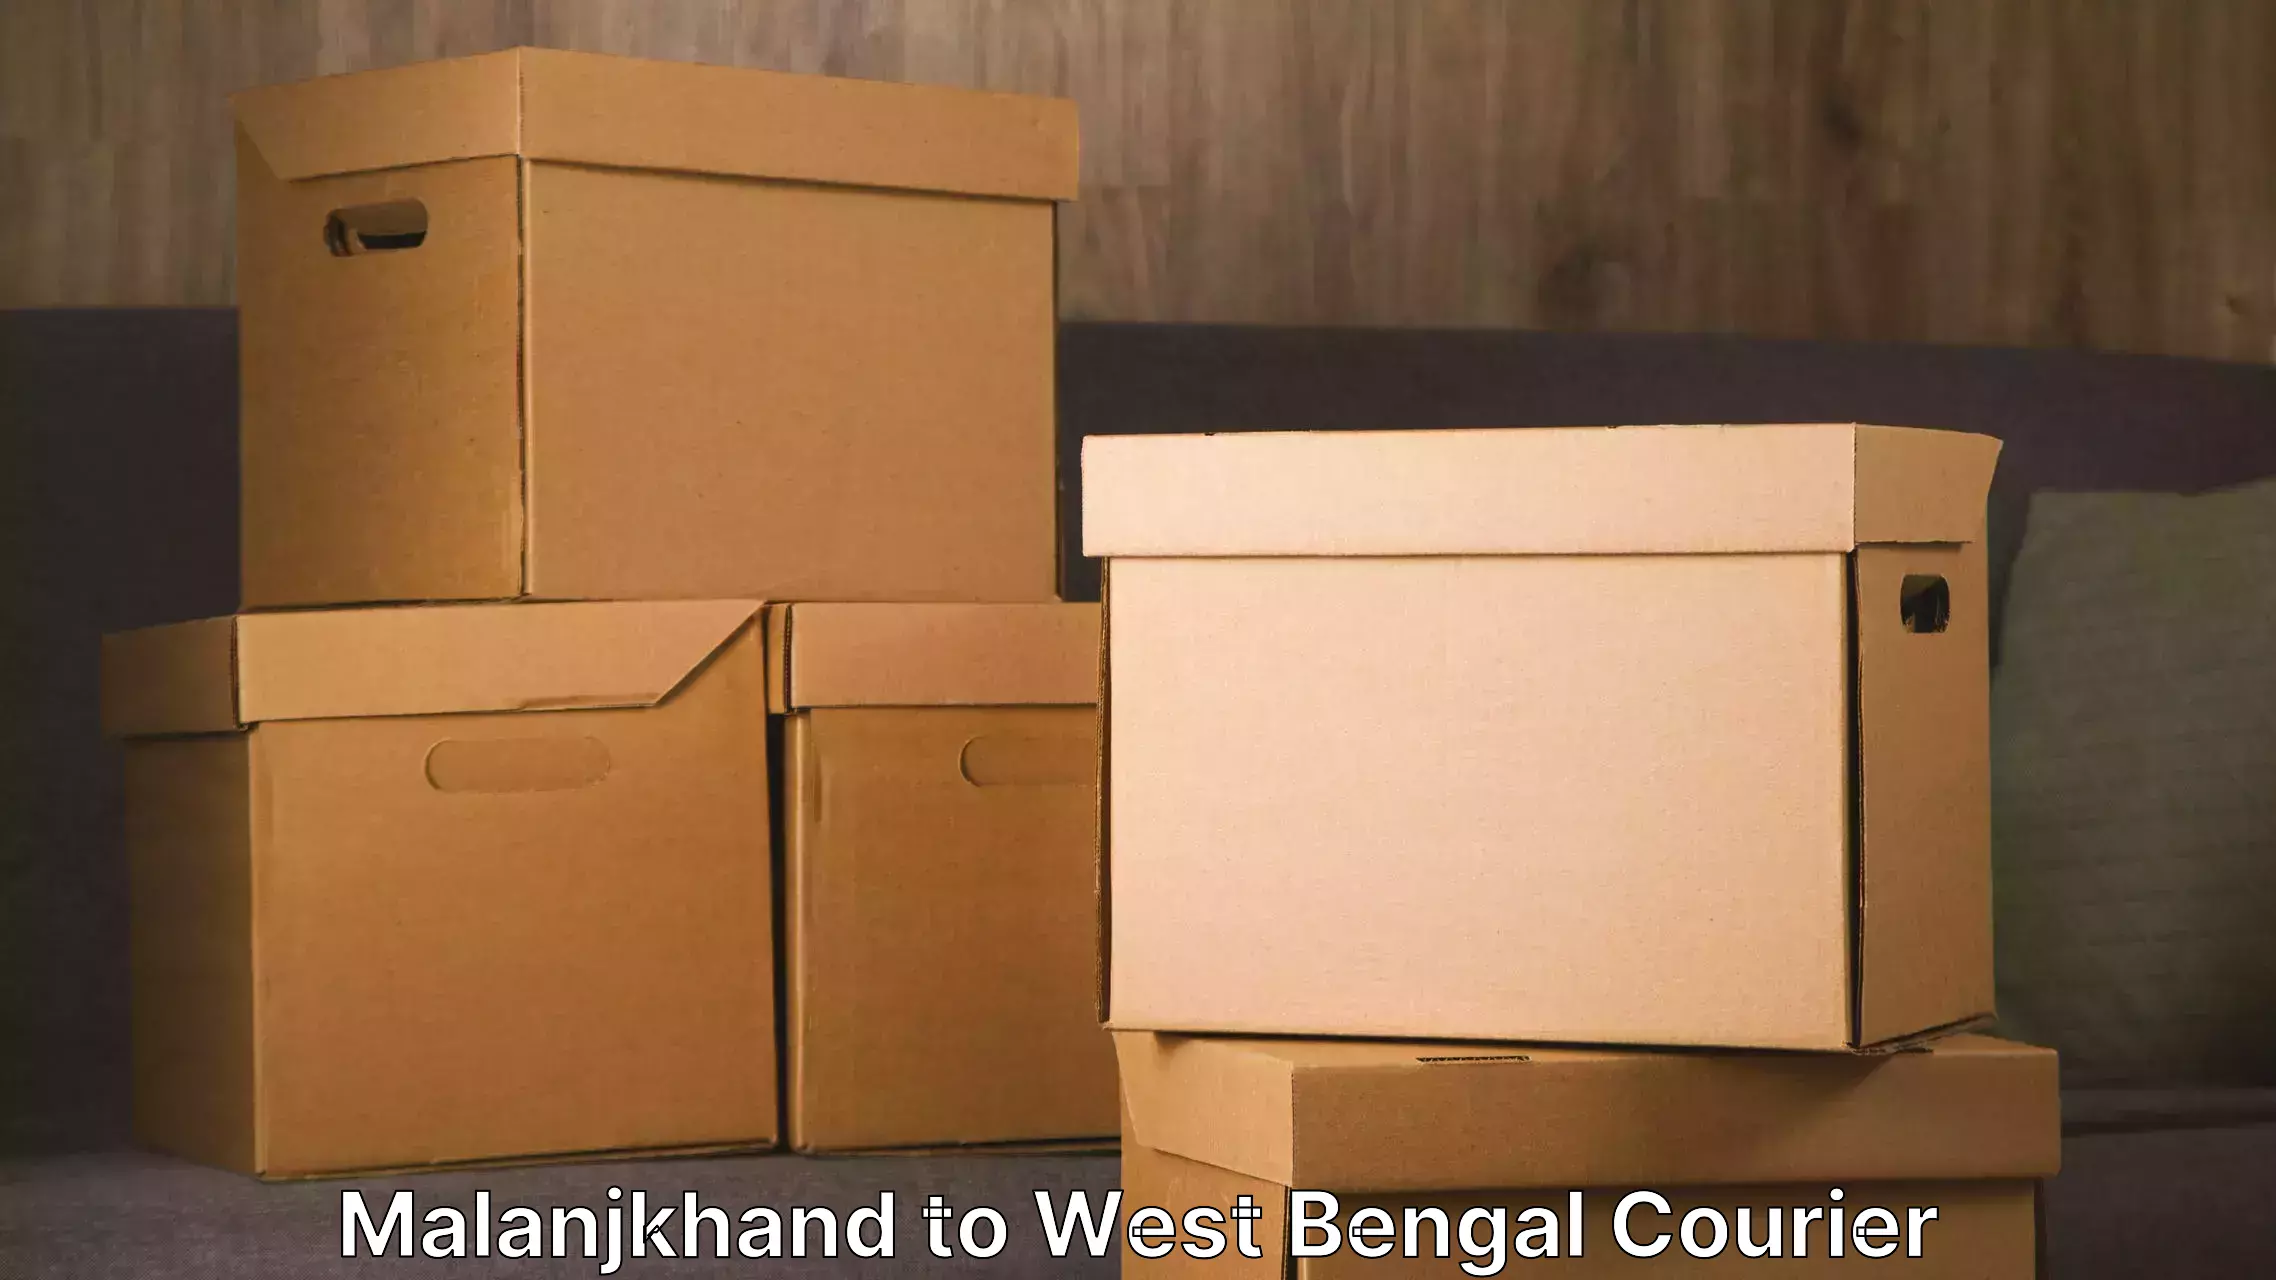 Trusted relocation experts Malanjkhand to Nabadwip